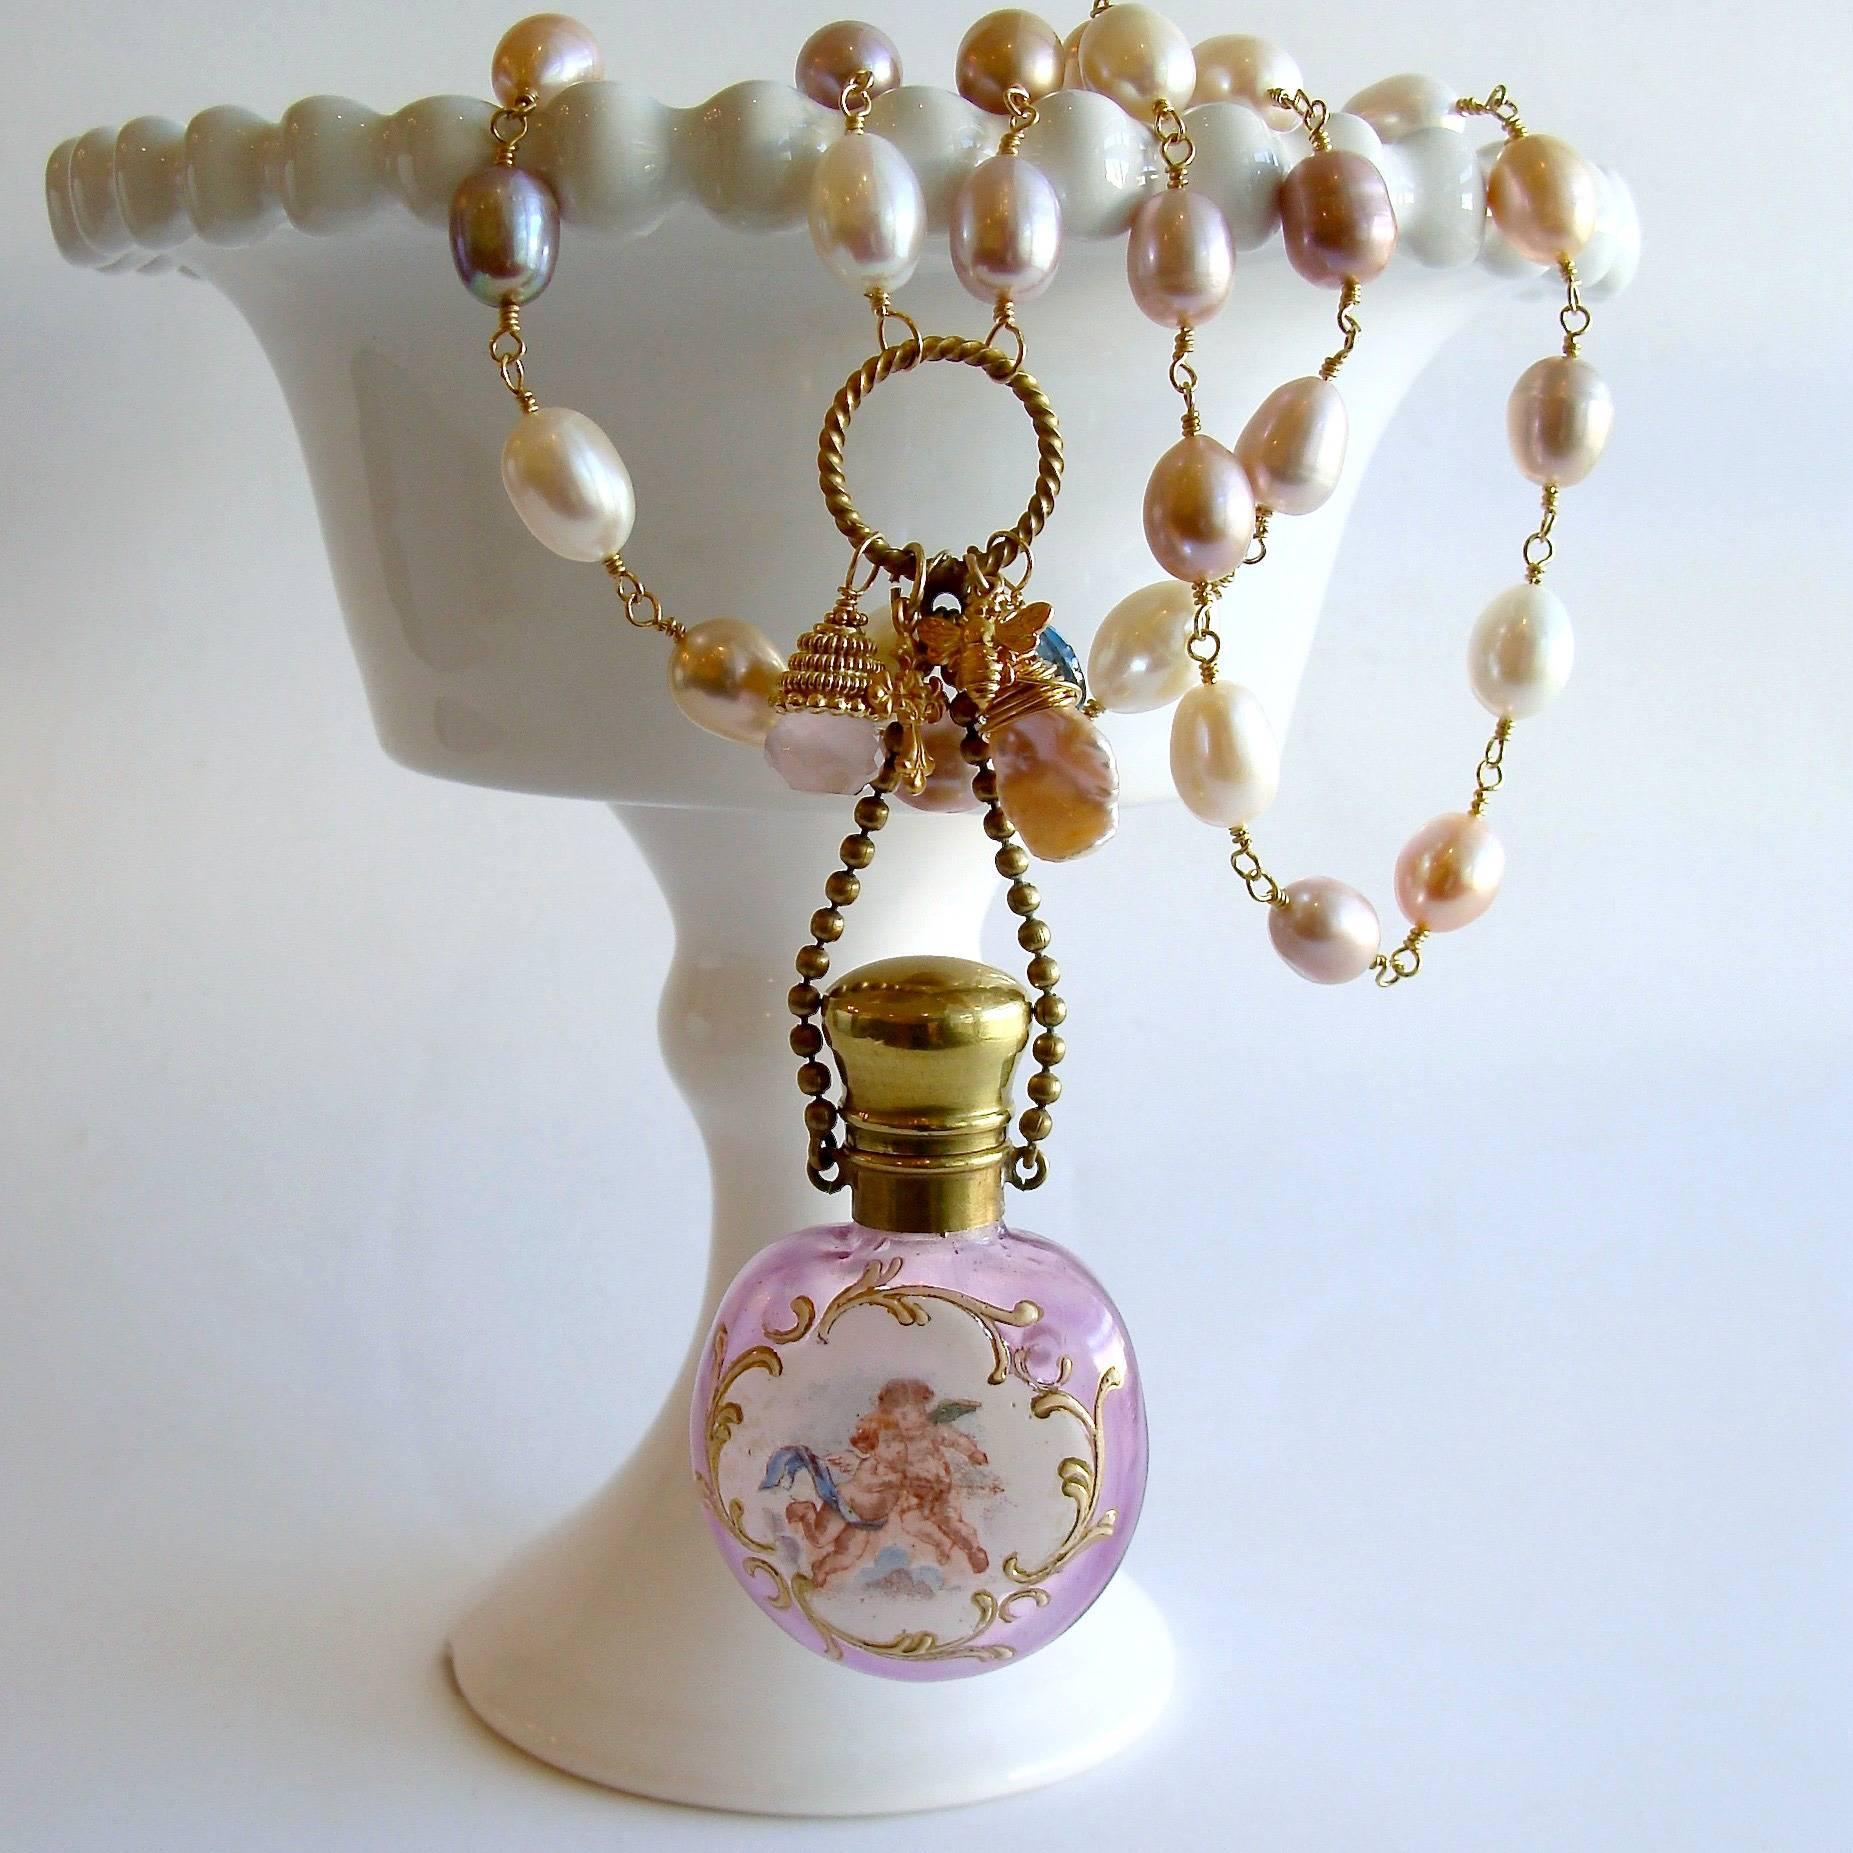 Violetta Necklace.

A stunning violet glass Victorian scent bottle (circa 1880), replete with a cartouche embossed frame of froliciking cherubs - has now become the featured pendant of this new necklace design.  The original glass stopper remains